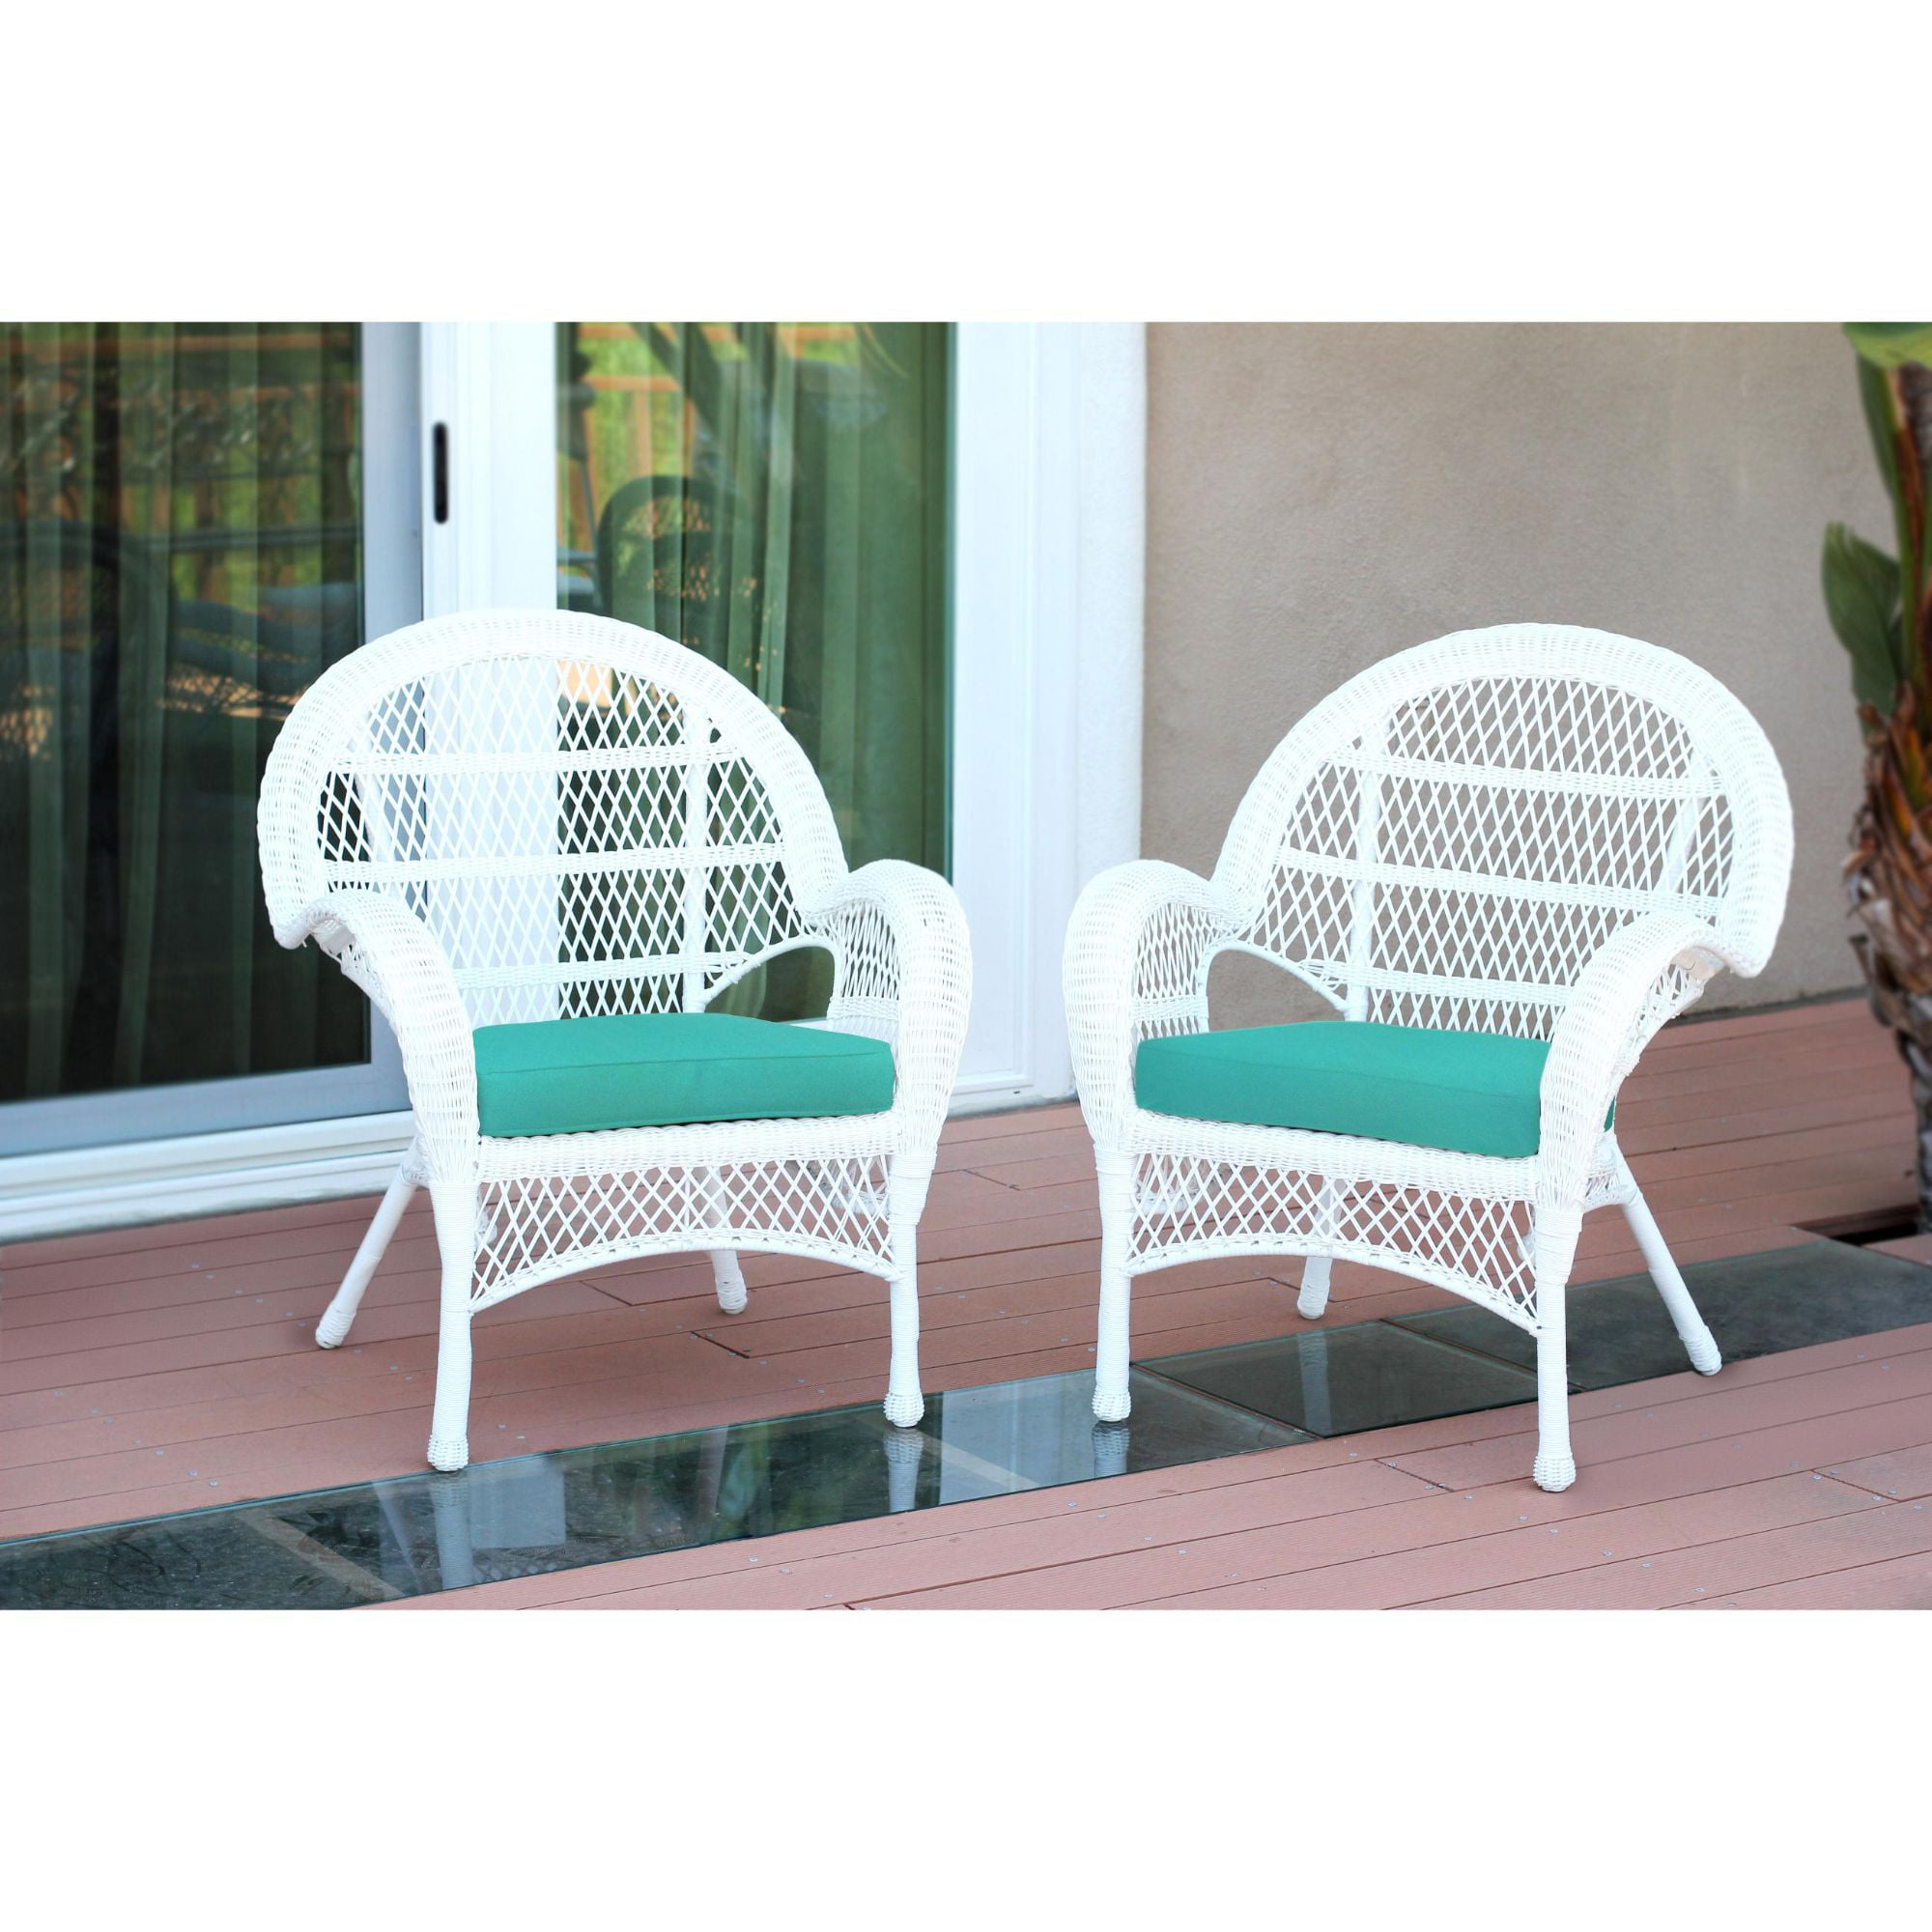 set of 2 white wicker outdoor furniture patio chairs turquoise cushions walmart com